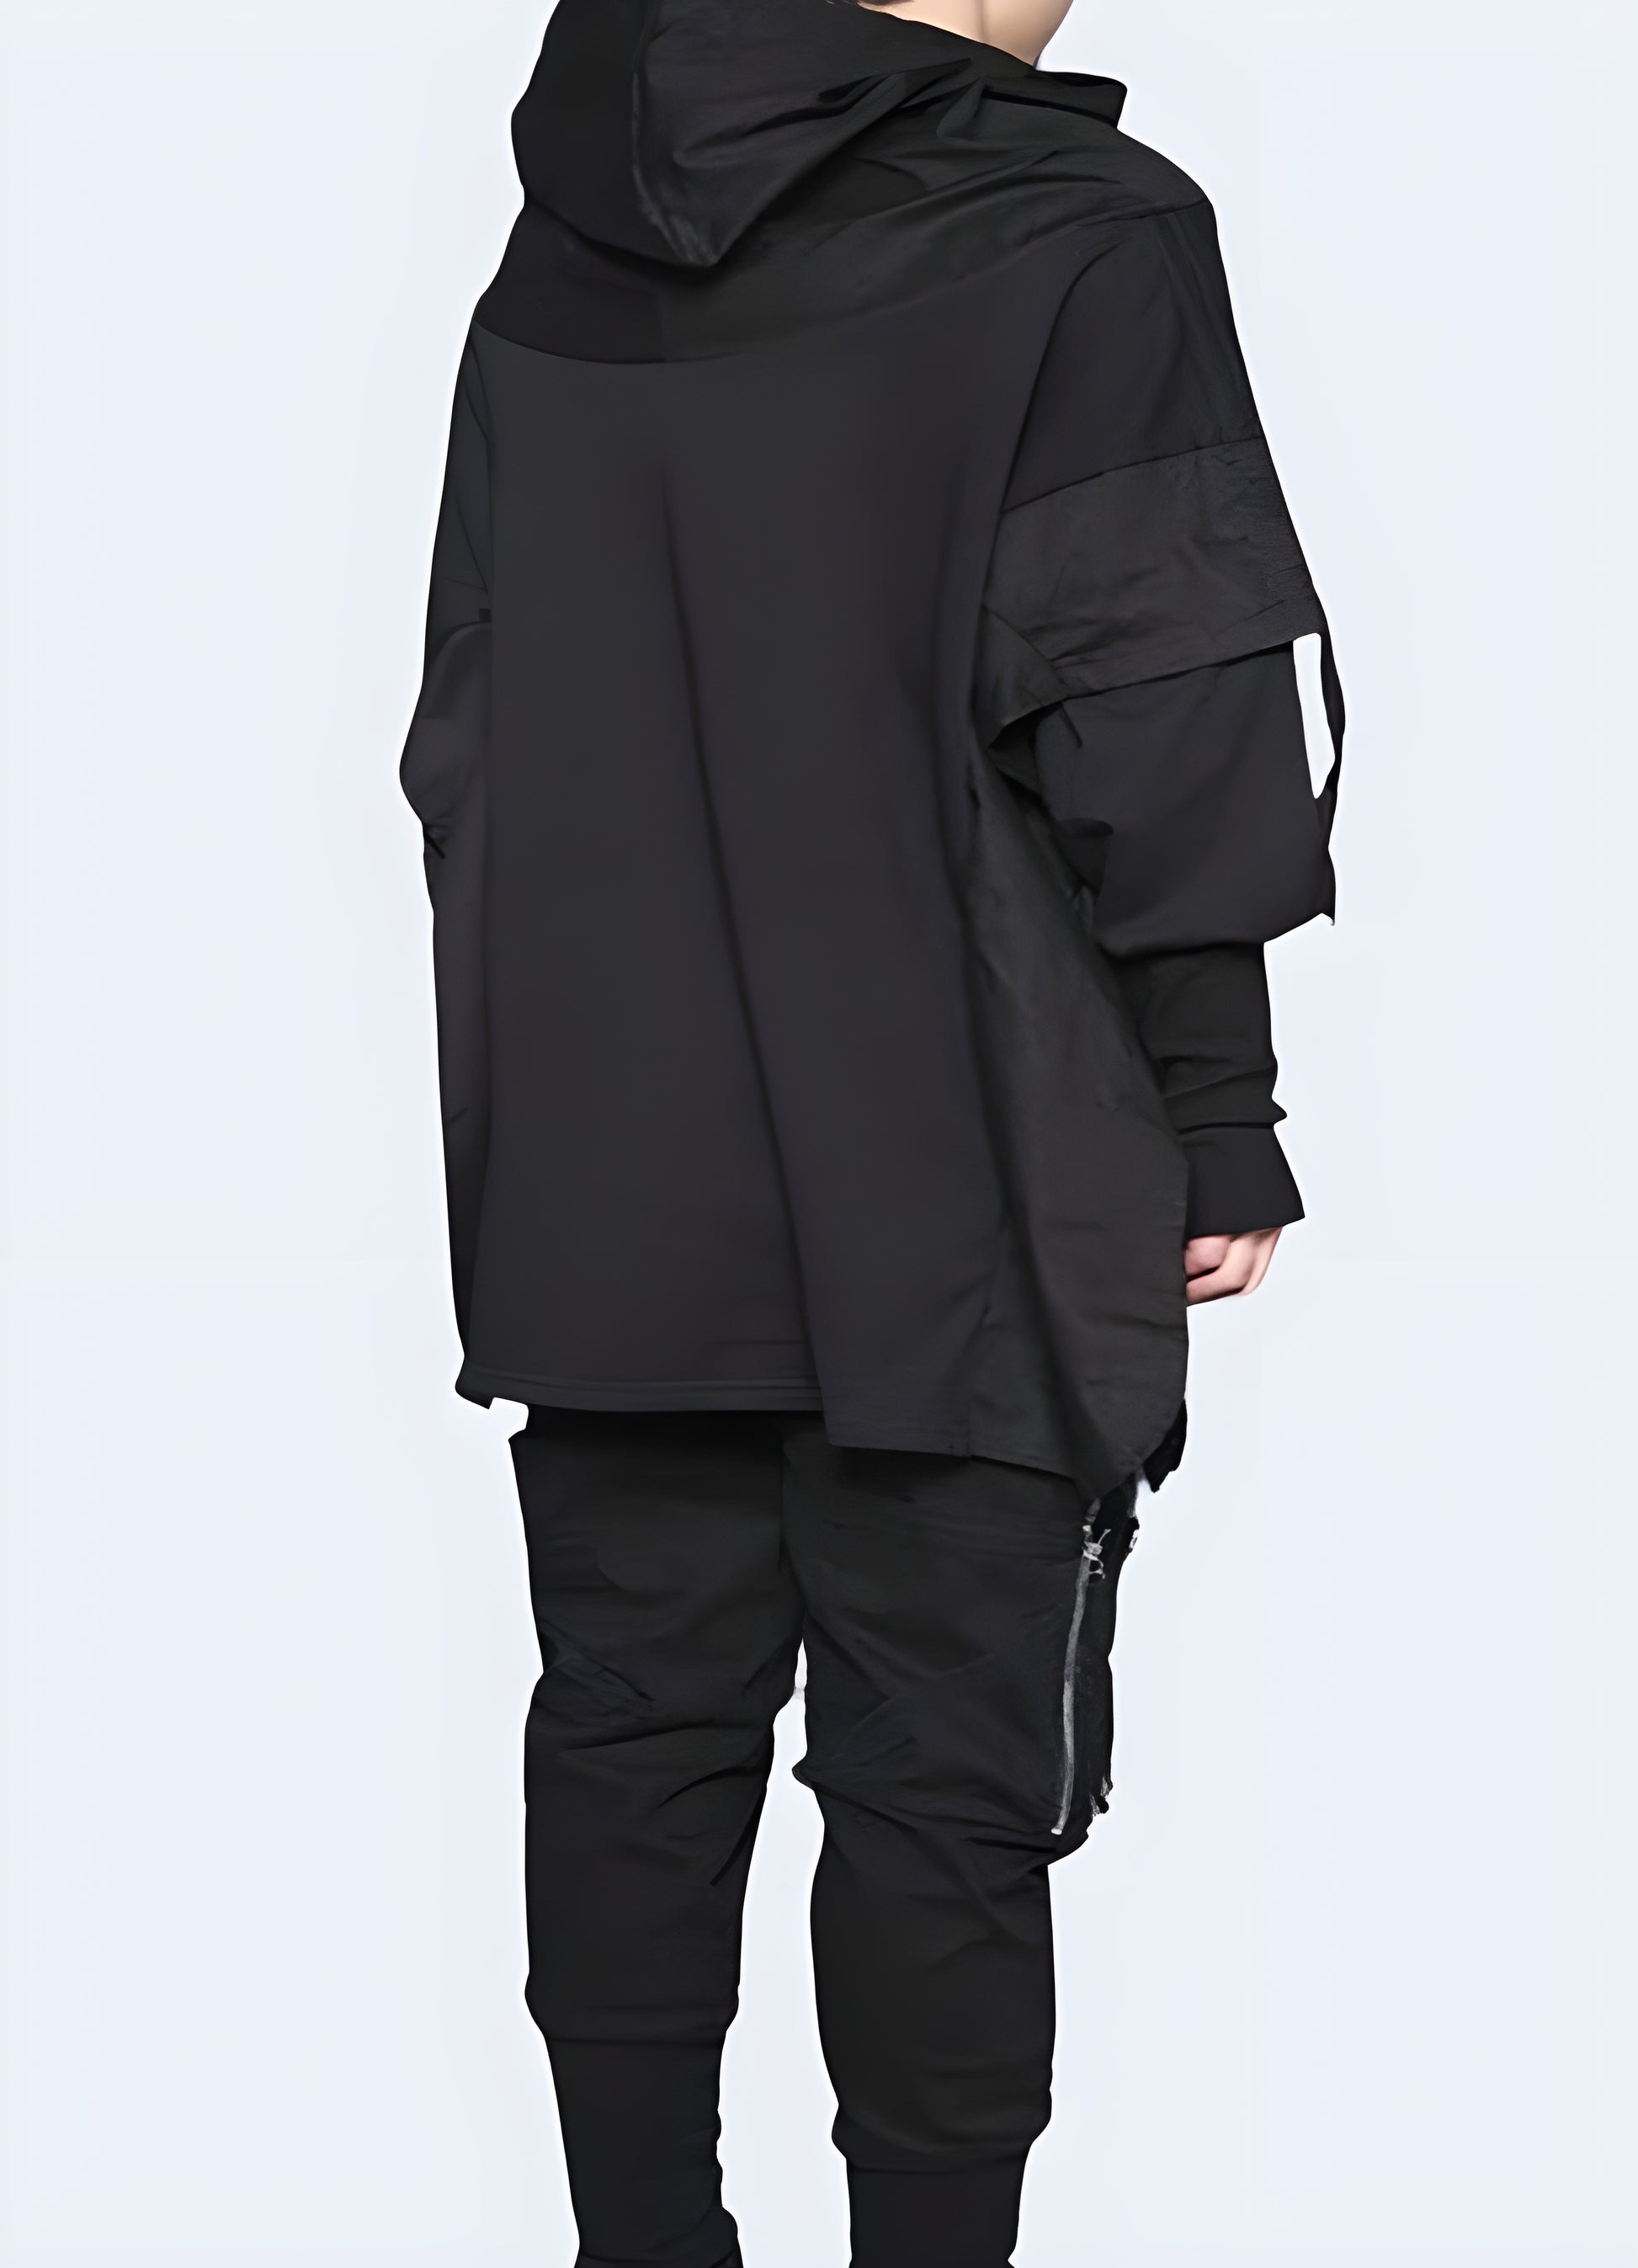 Gloves style on the ends of the sleeve hooded poncho.